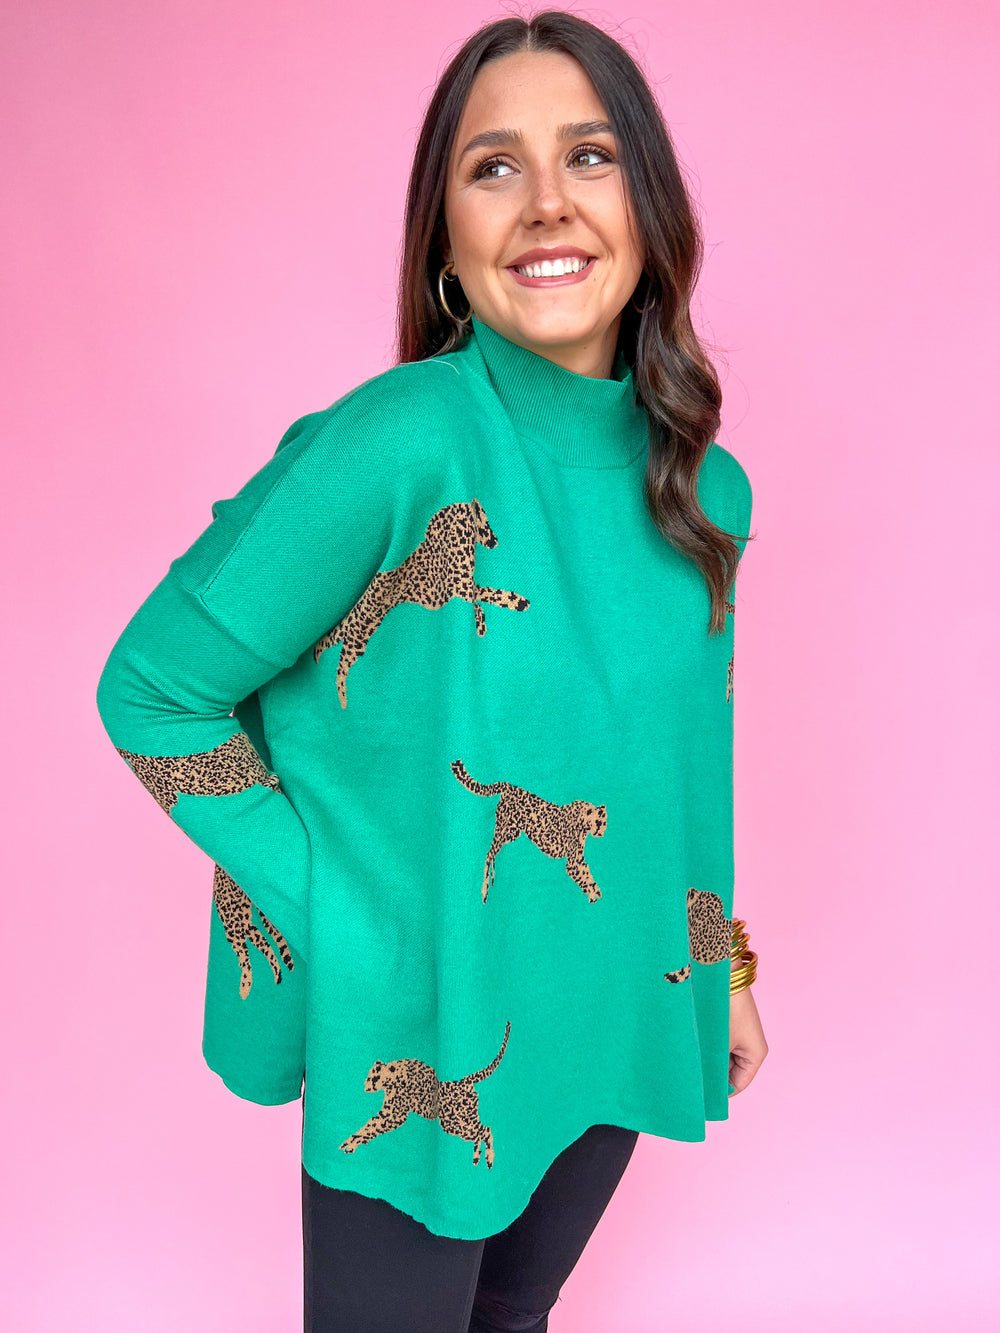 On The Catwalk Sweater - Kelly Green